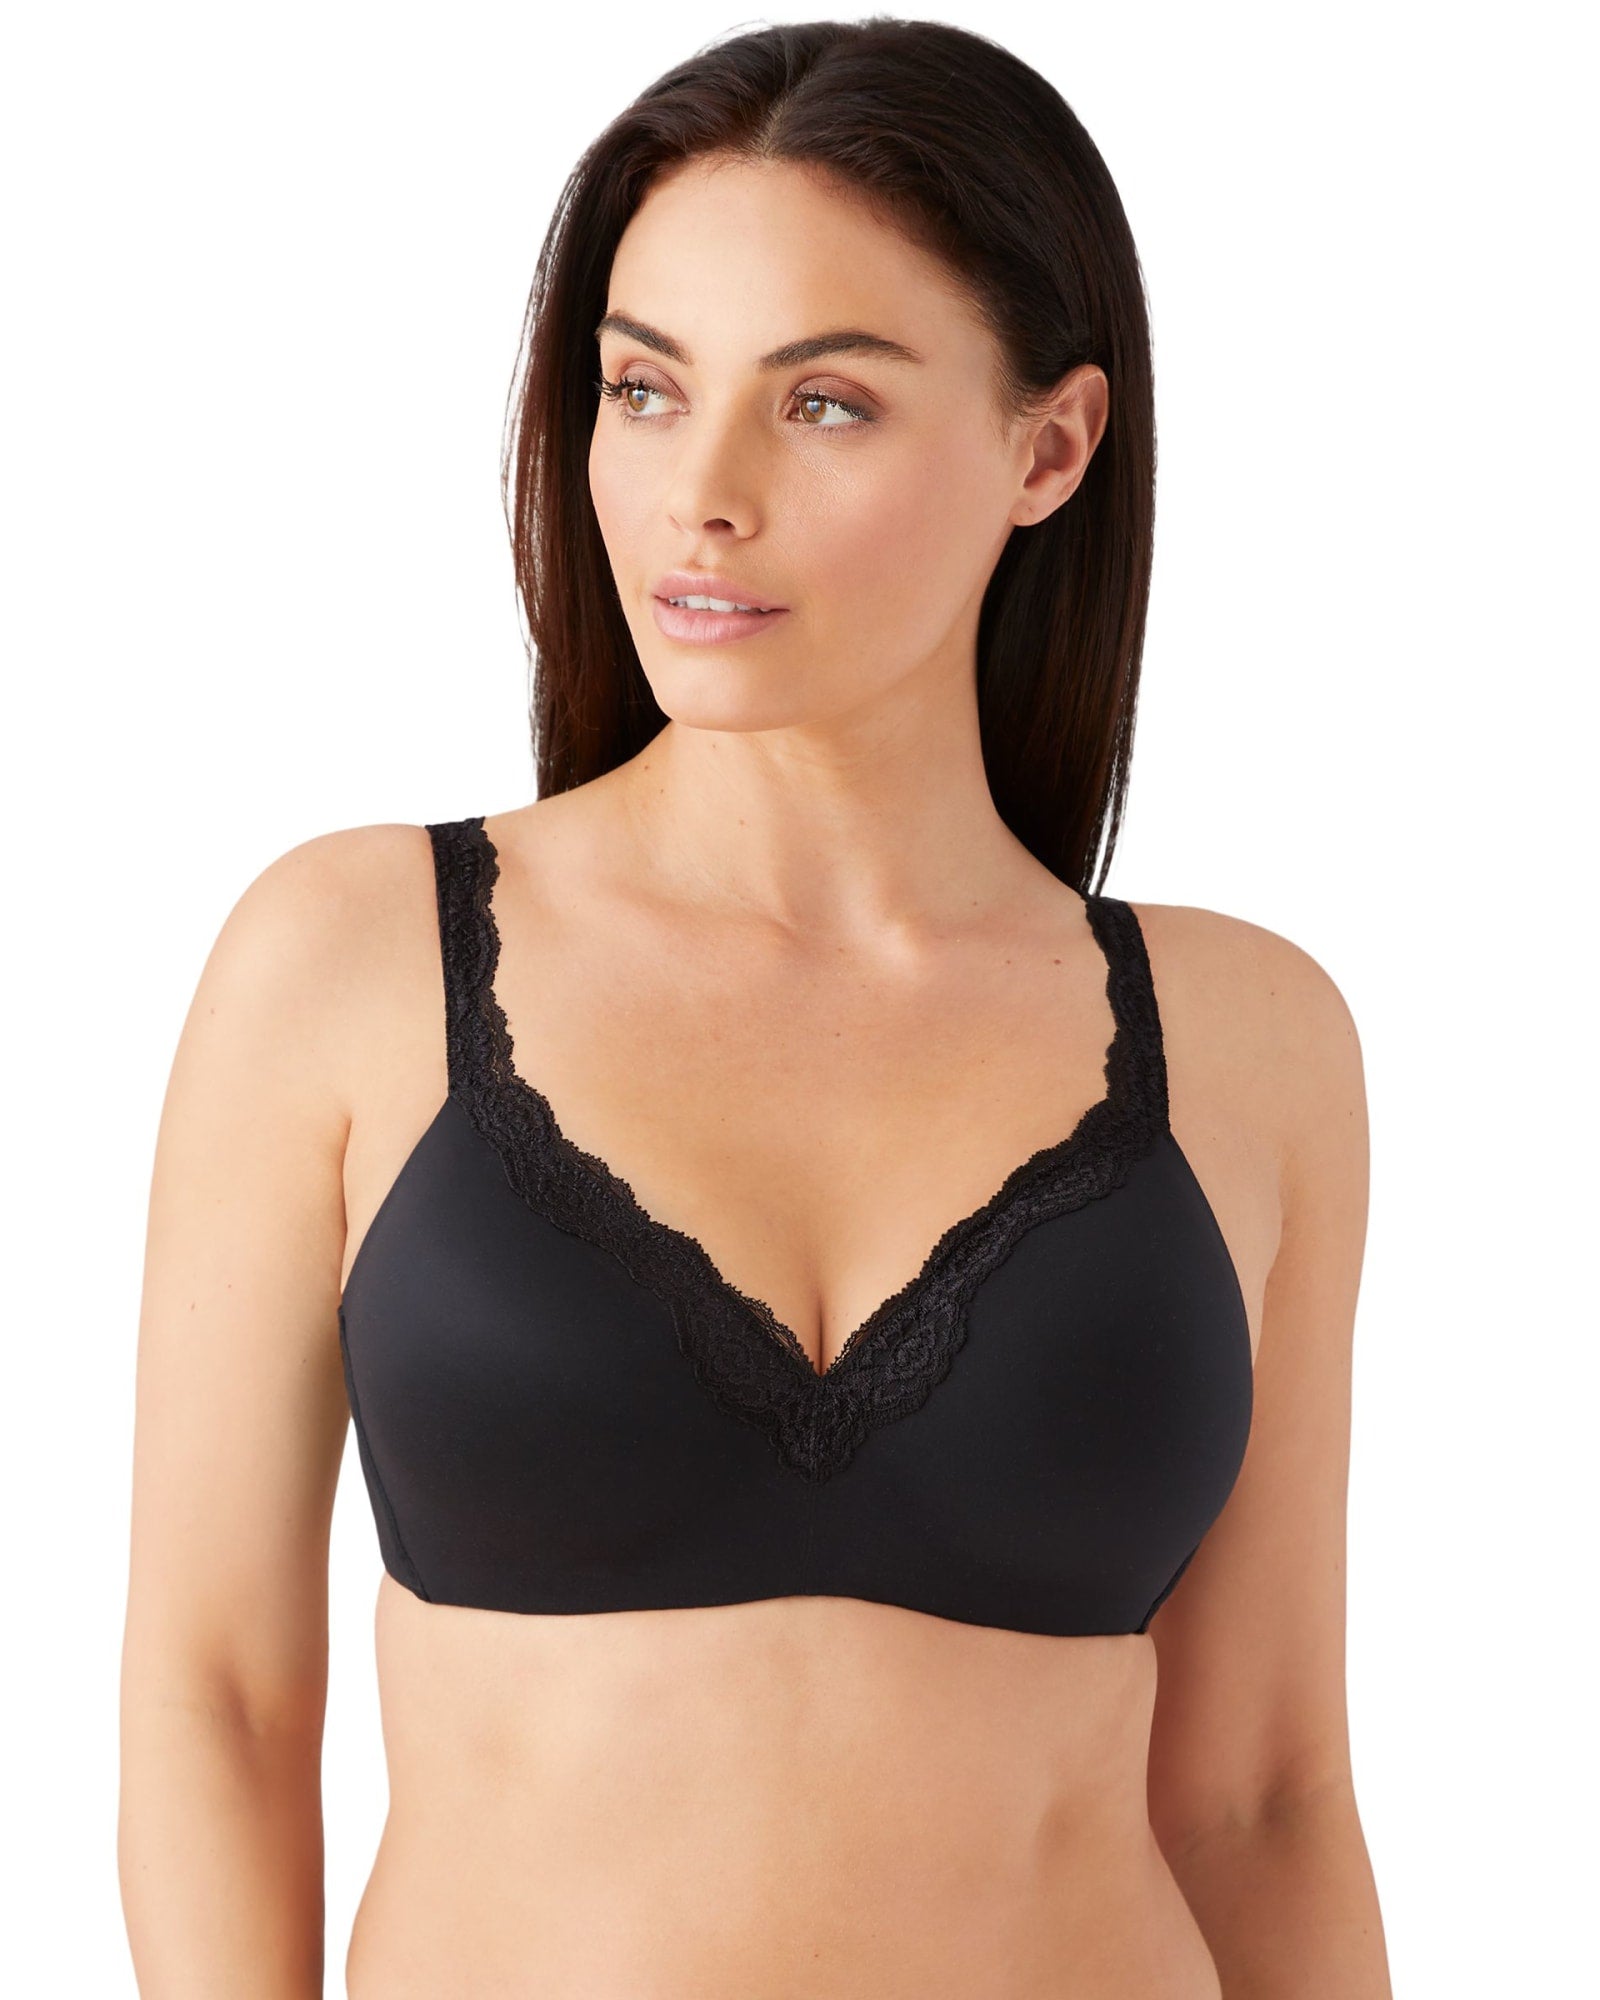 Women's Modesty Spa Bra (Individually Packaged)